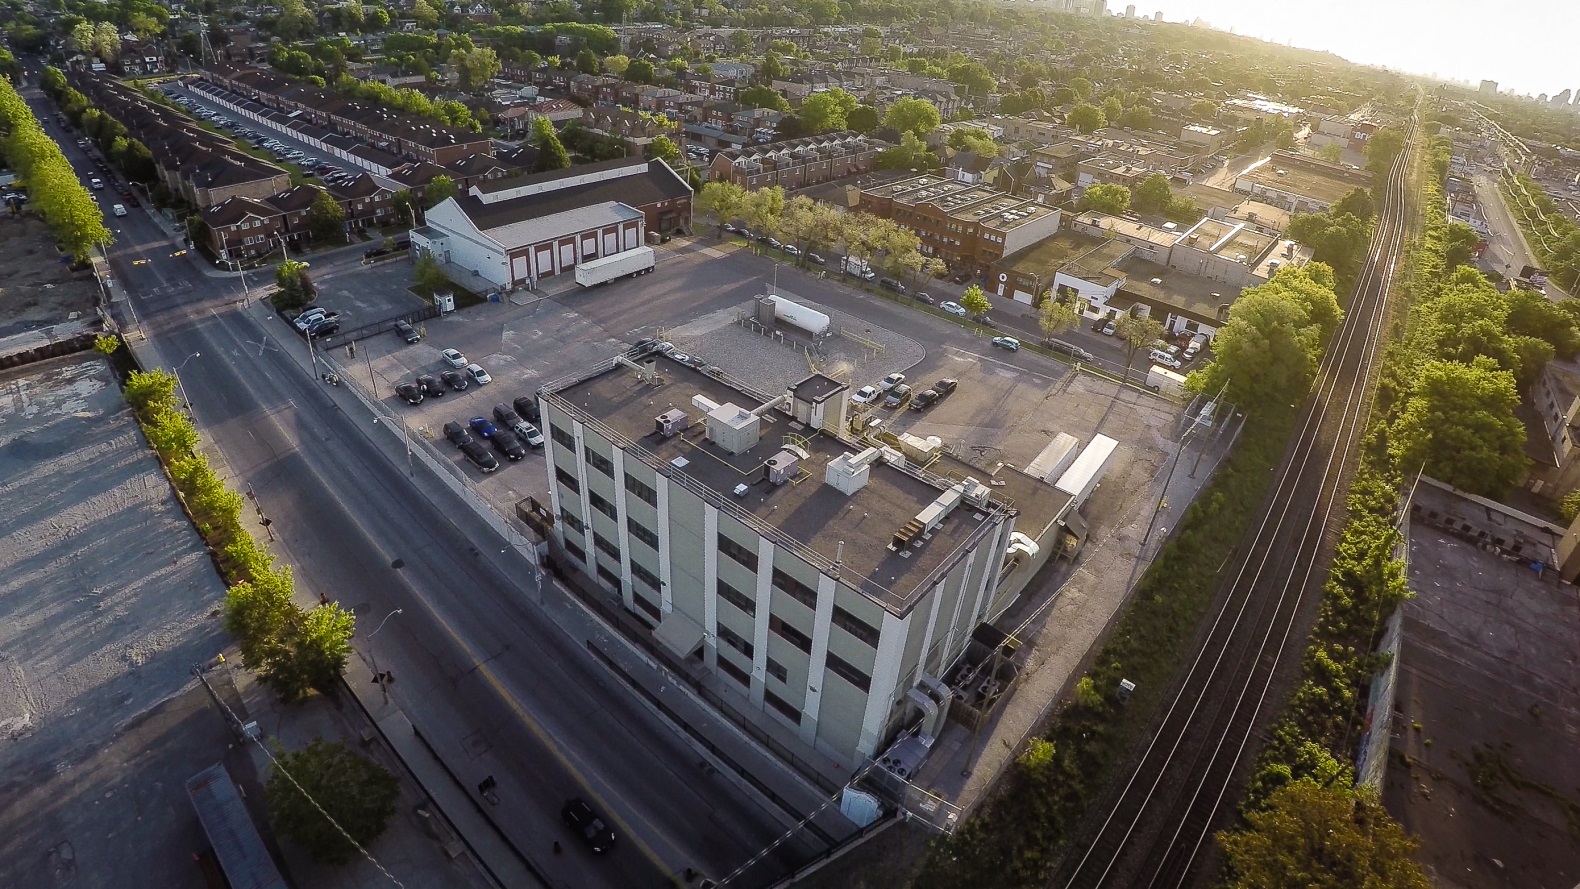 This picture shows an aerial view of the GEH-C Toronto  facility which occupies a small site in the city of Toronto